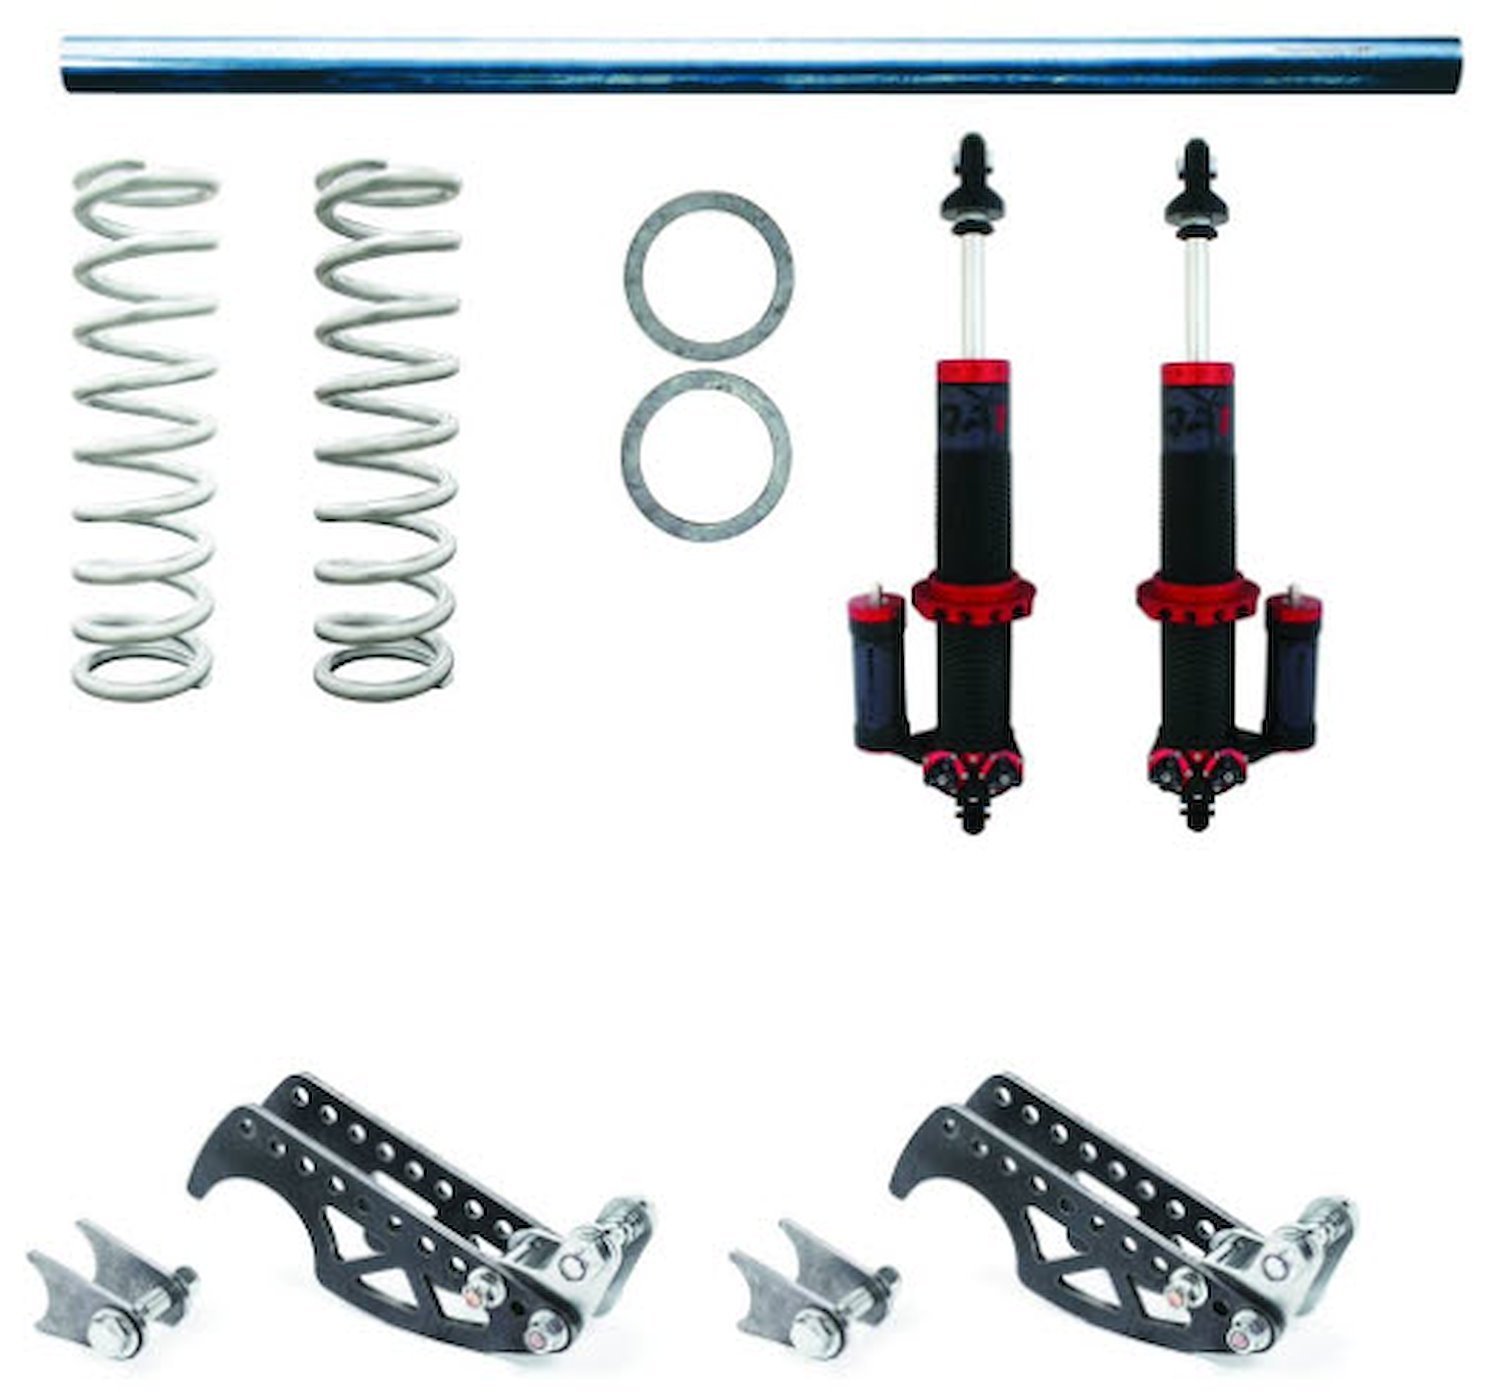 DM501-12300 Heavy-Duty Pro Rear Coil-Over Conversion System for 3 in. Axle Tubes w/MOD-Series Shocks & 300 lb. Springs